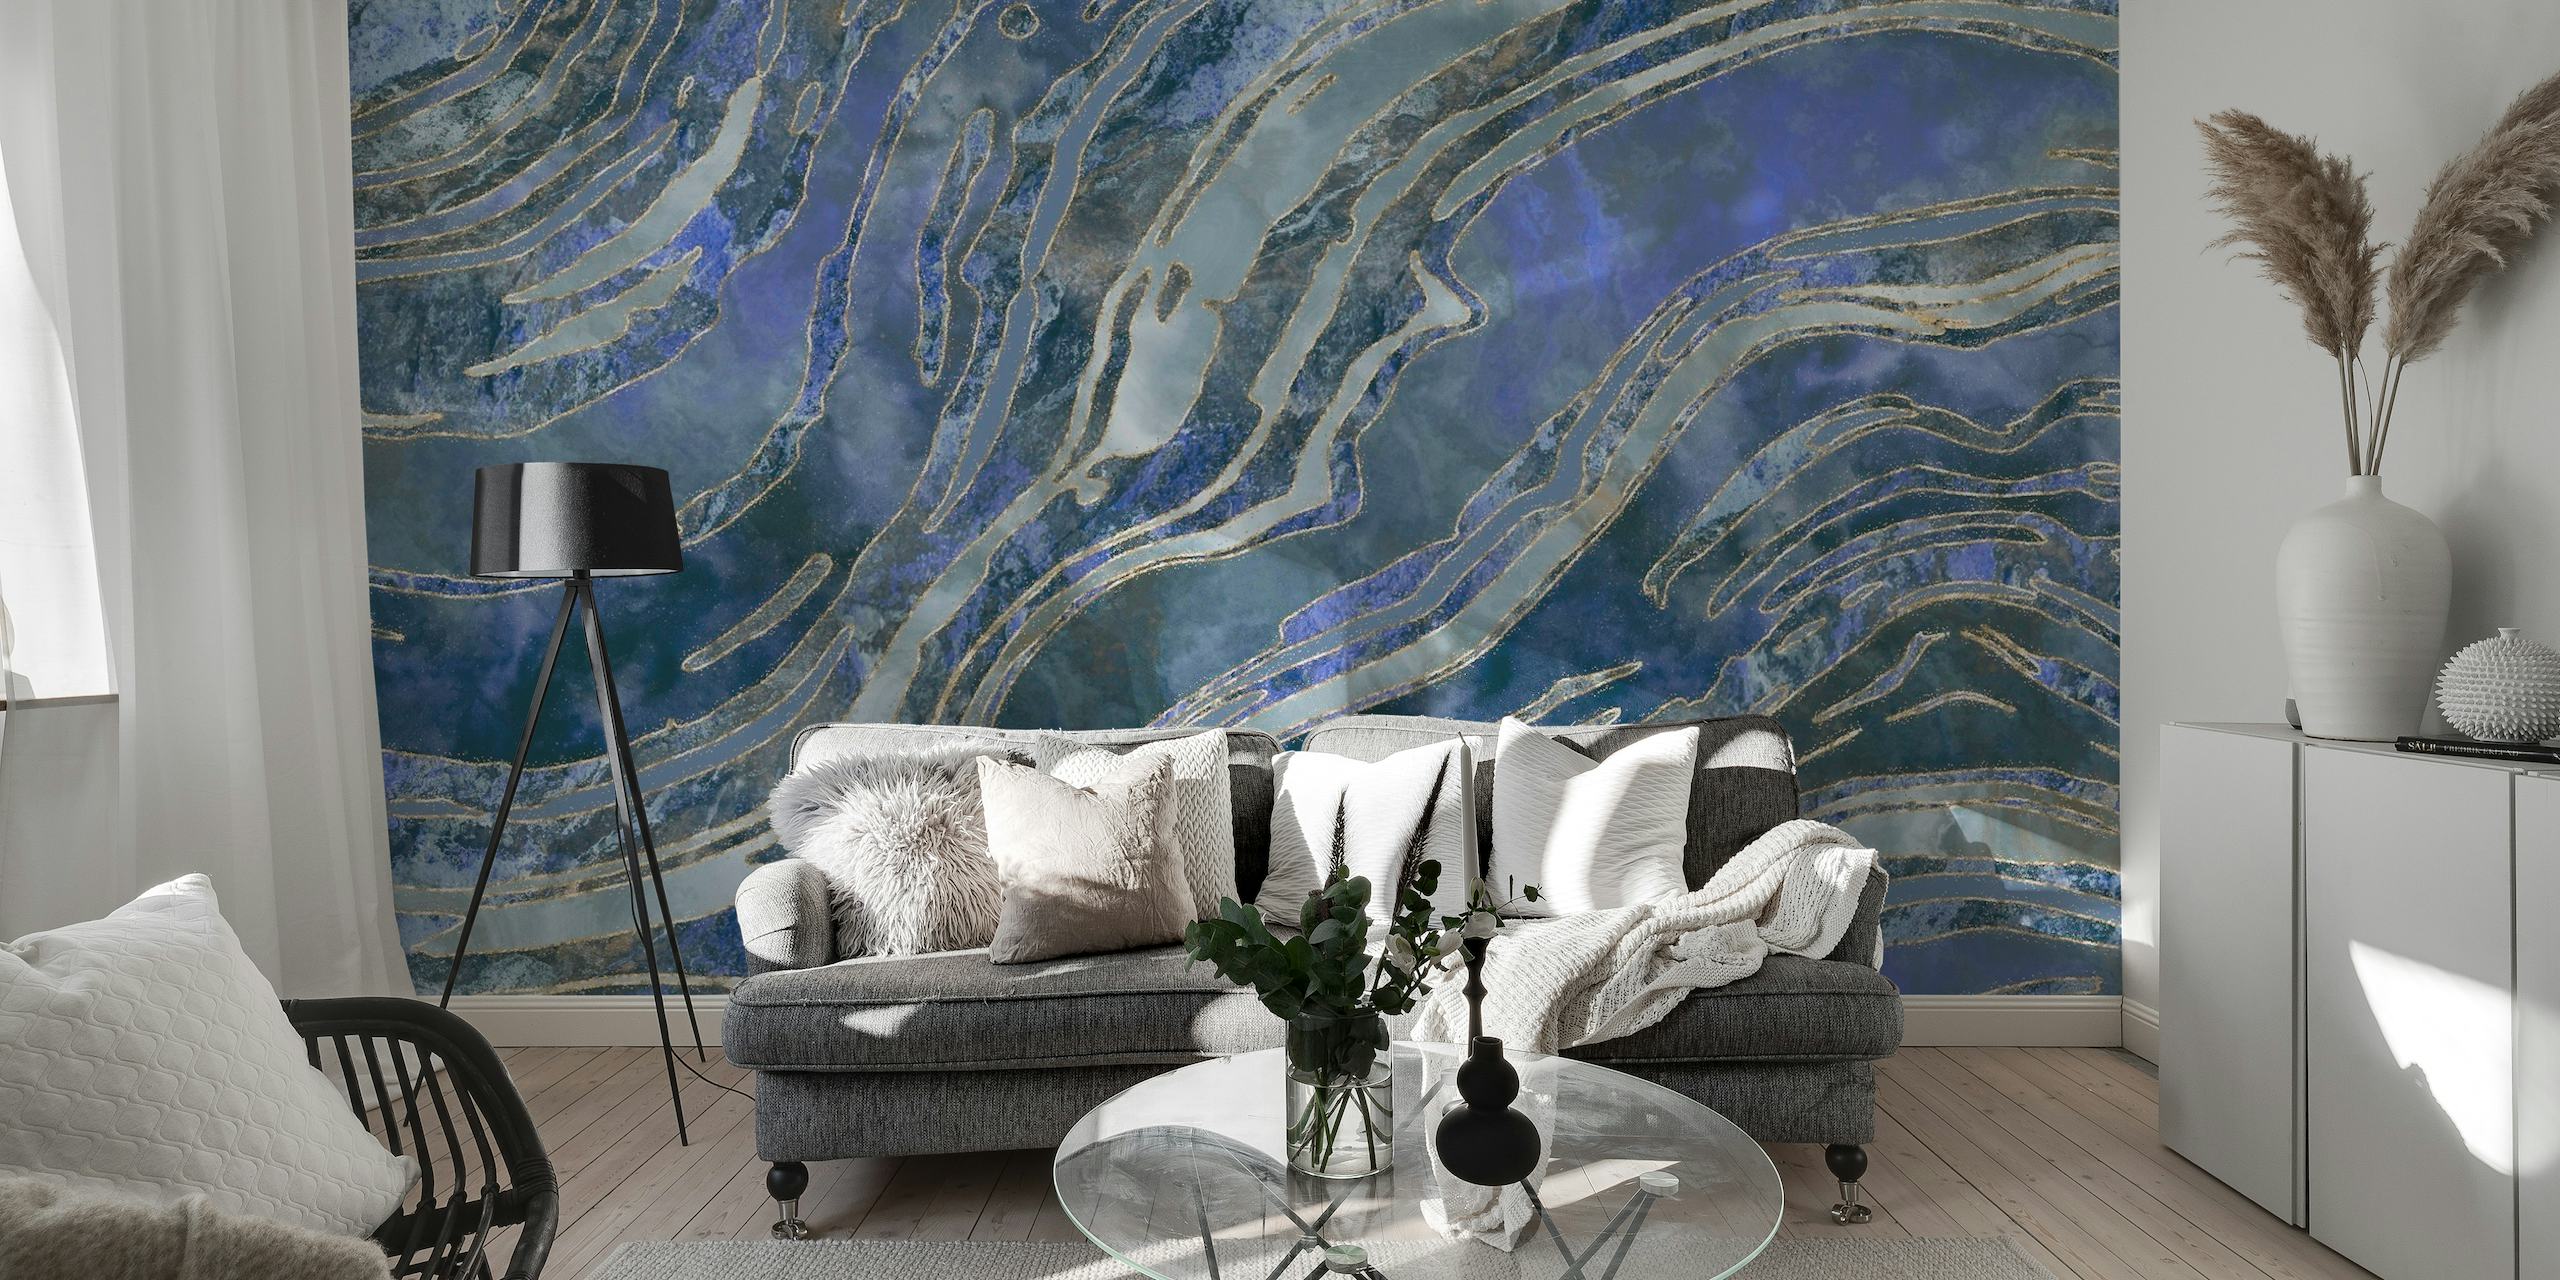 Ice Blue Marble wall mural featuring swirls of blue and white